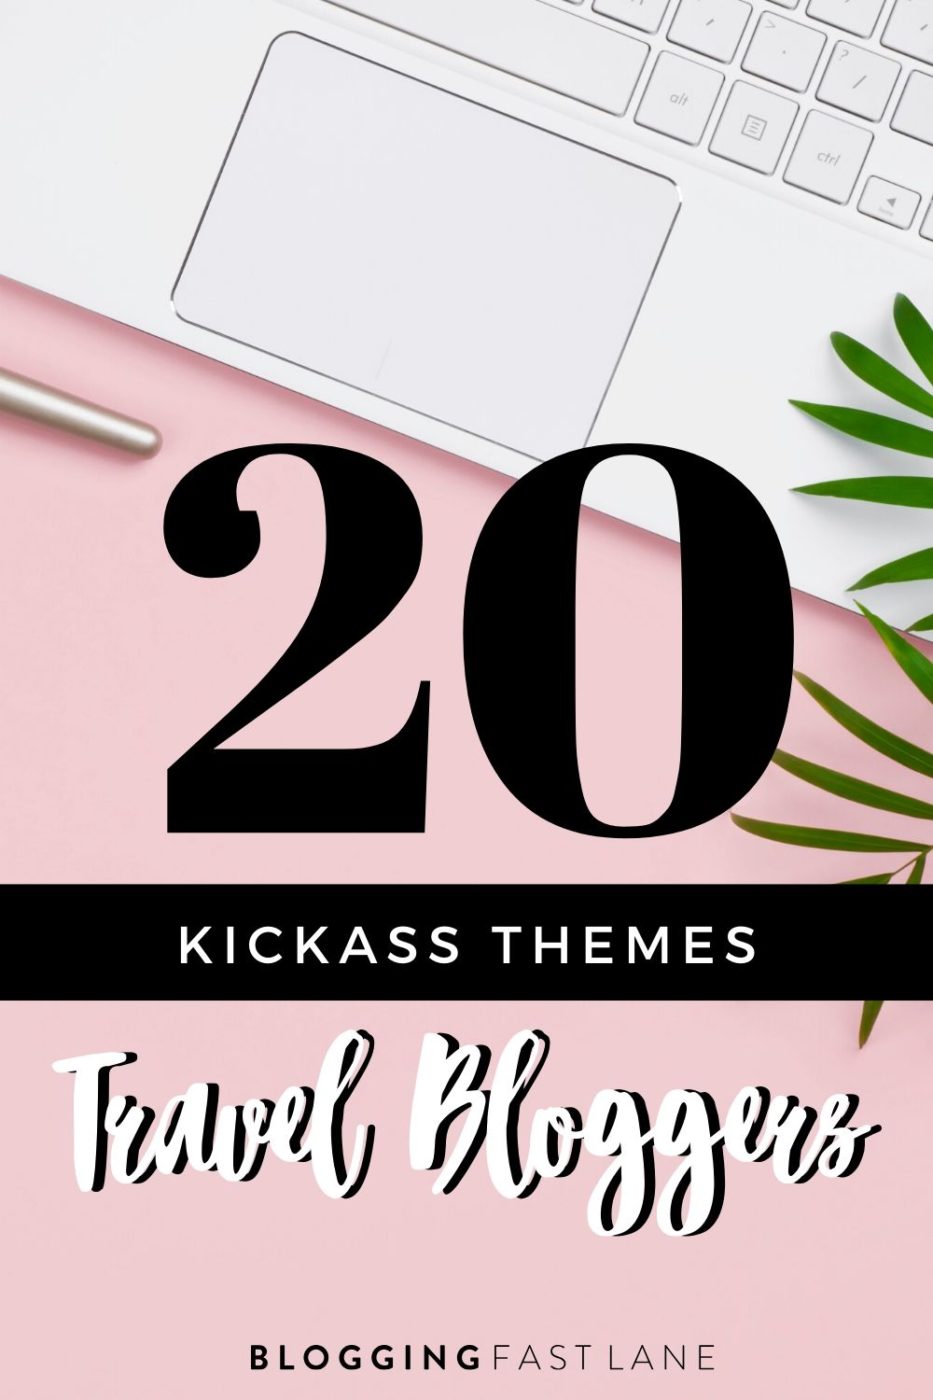 20 Best WordPress Themes for Travel Blogs | Looking for a way to create the travel blog of your dreams? Click here for 20 best WordPress themes for travel blogs to get started now!